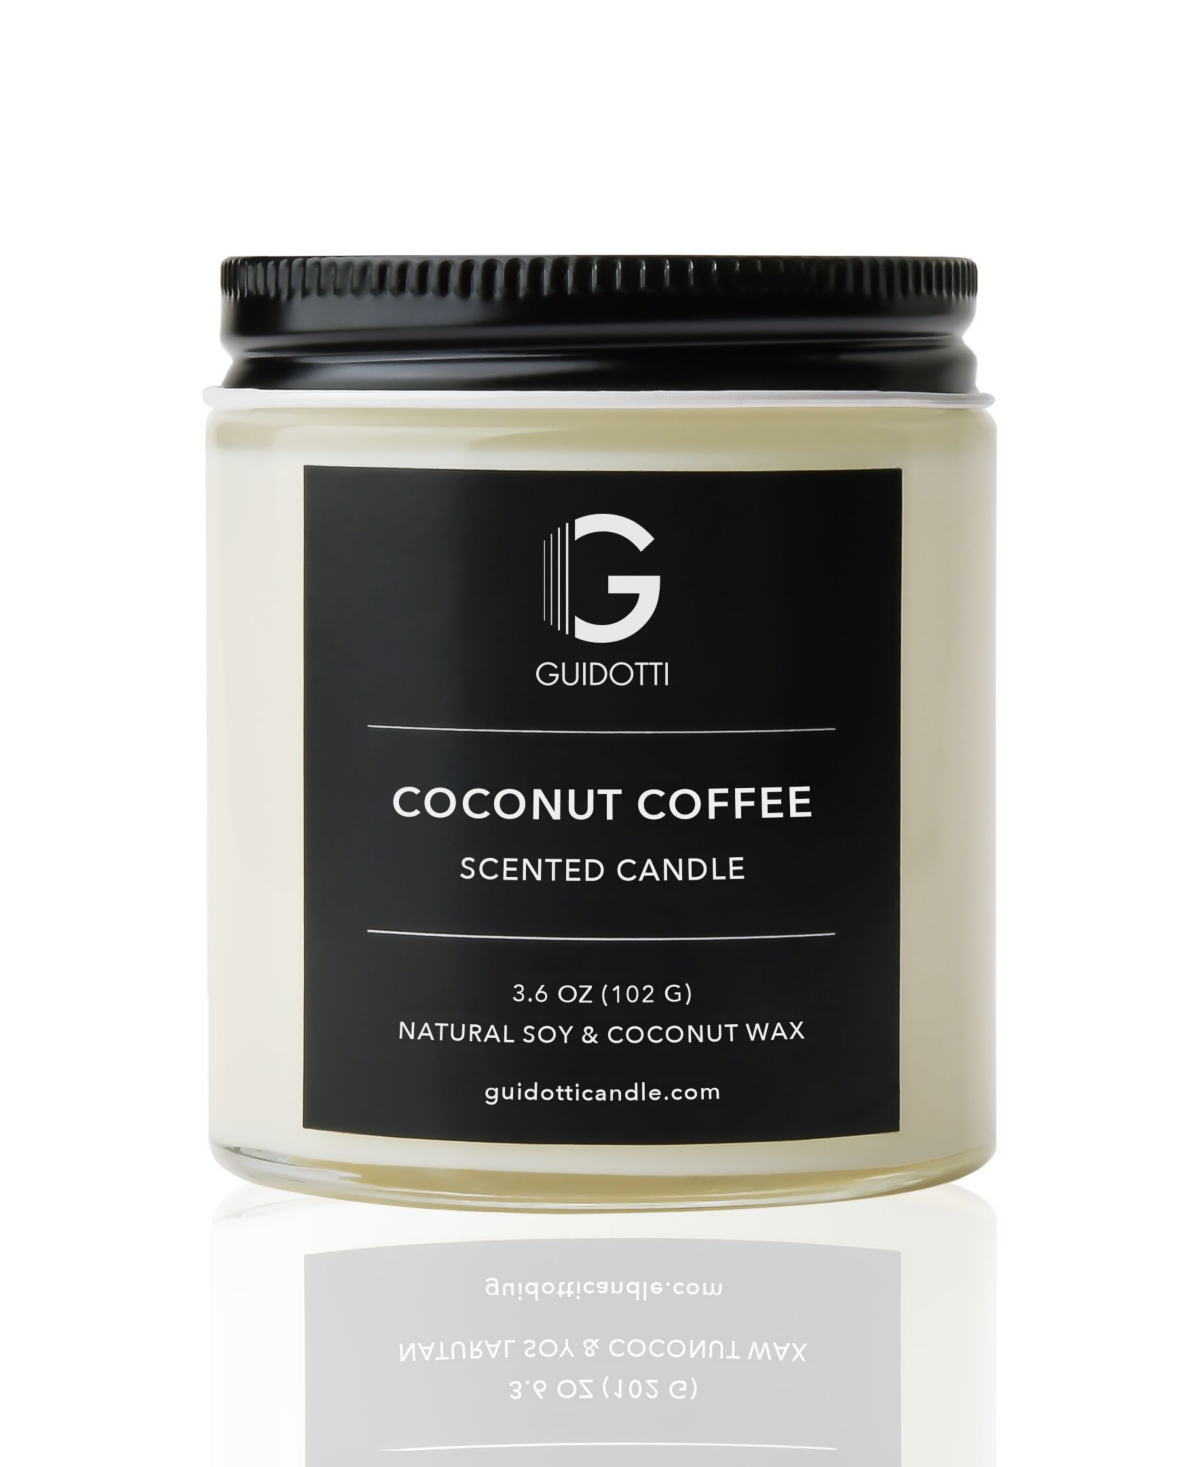 Coconut Coffee Scented Candle, 1-Wick, 3.6 oz